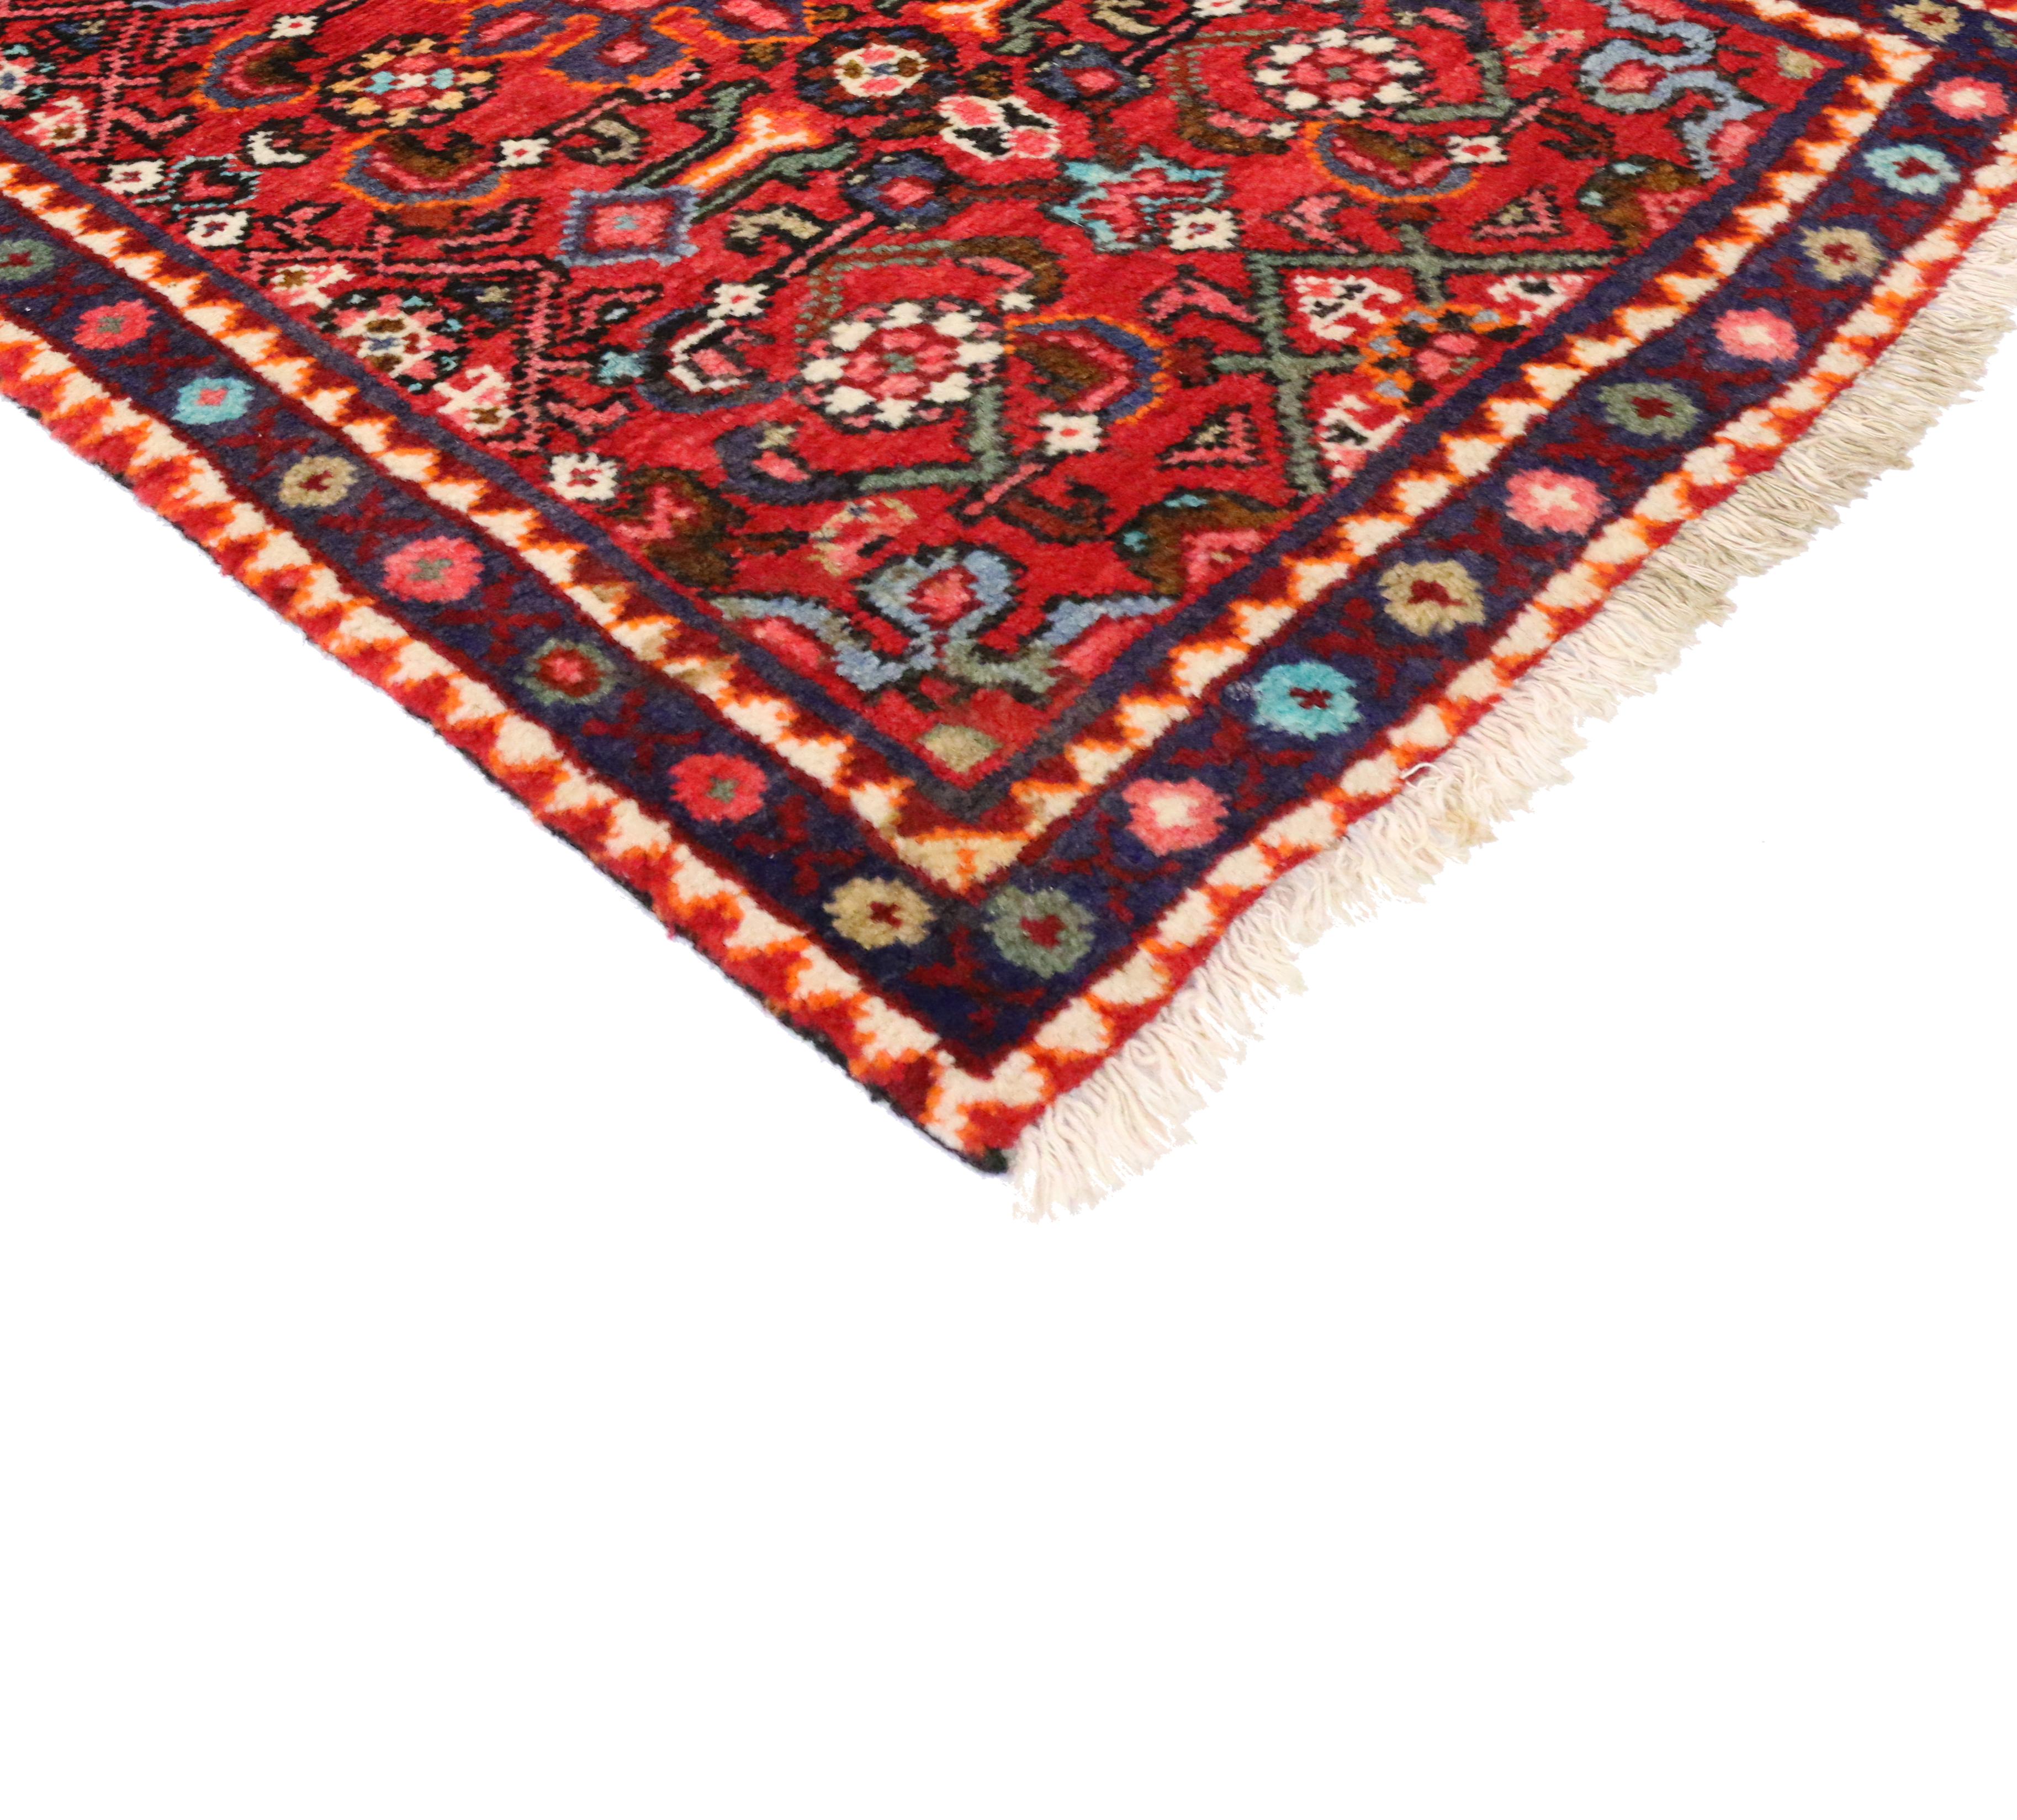 76129 vintage Persian Hamadan rug for kitchen, bathroom, foyer or entry rug 02'00 x 02'11. This hand knotted wool vintage Persian Hamadan rug with Jacobean style features a small floral medallion surrounded by an all-over Herati pattern floating on